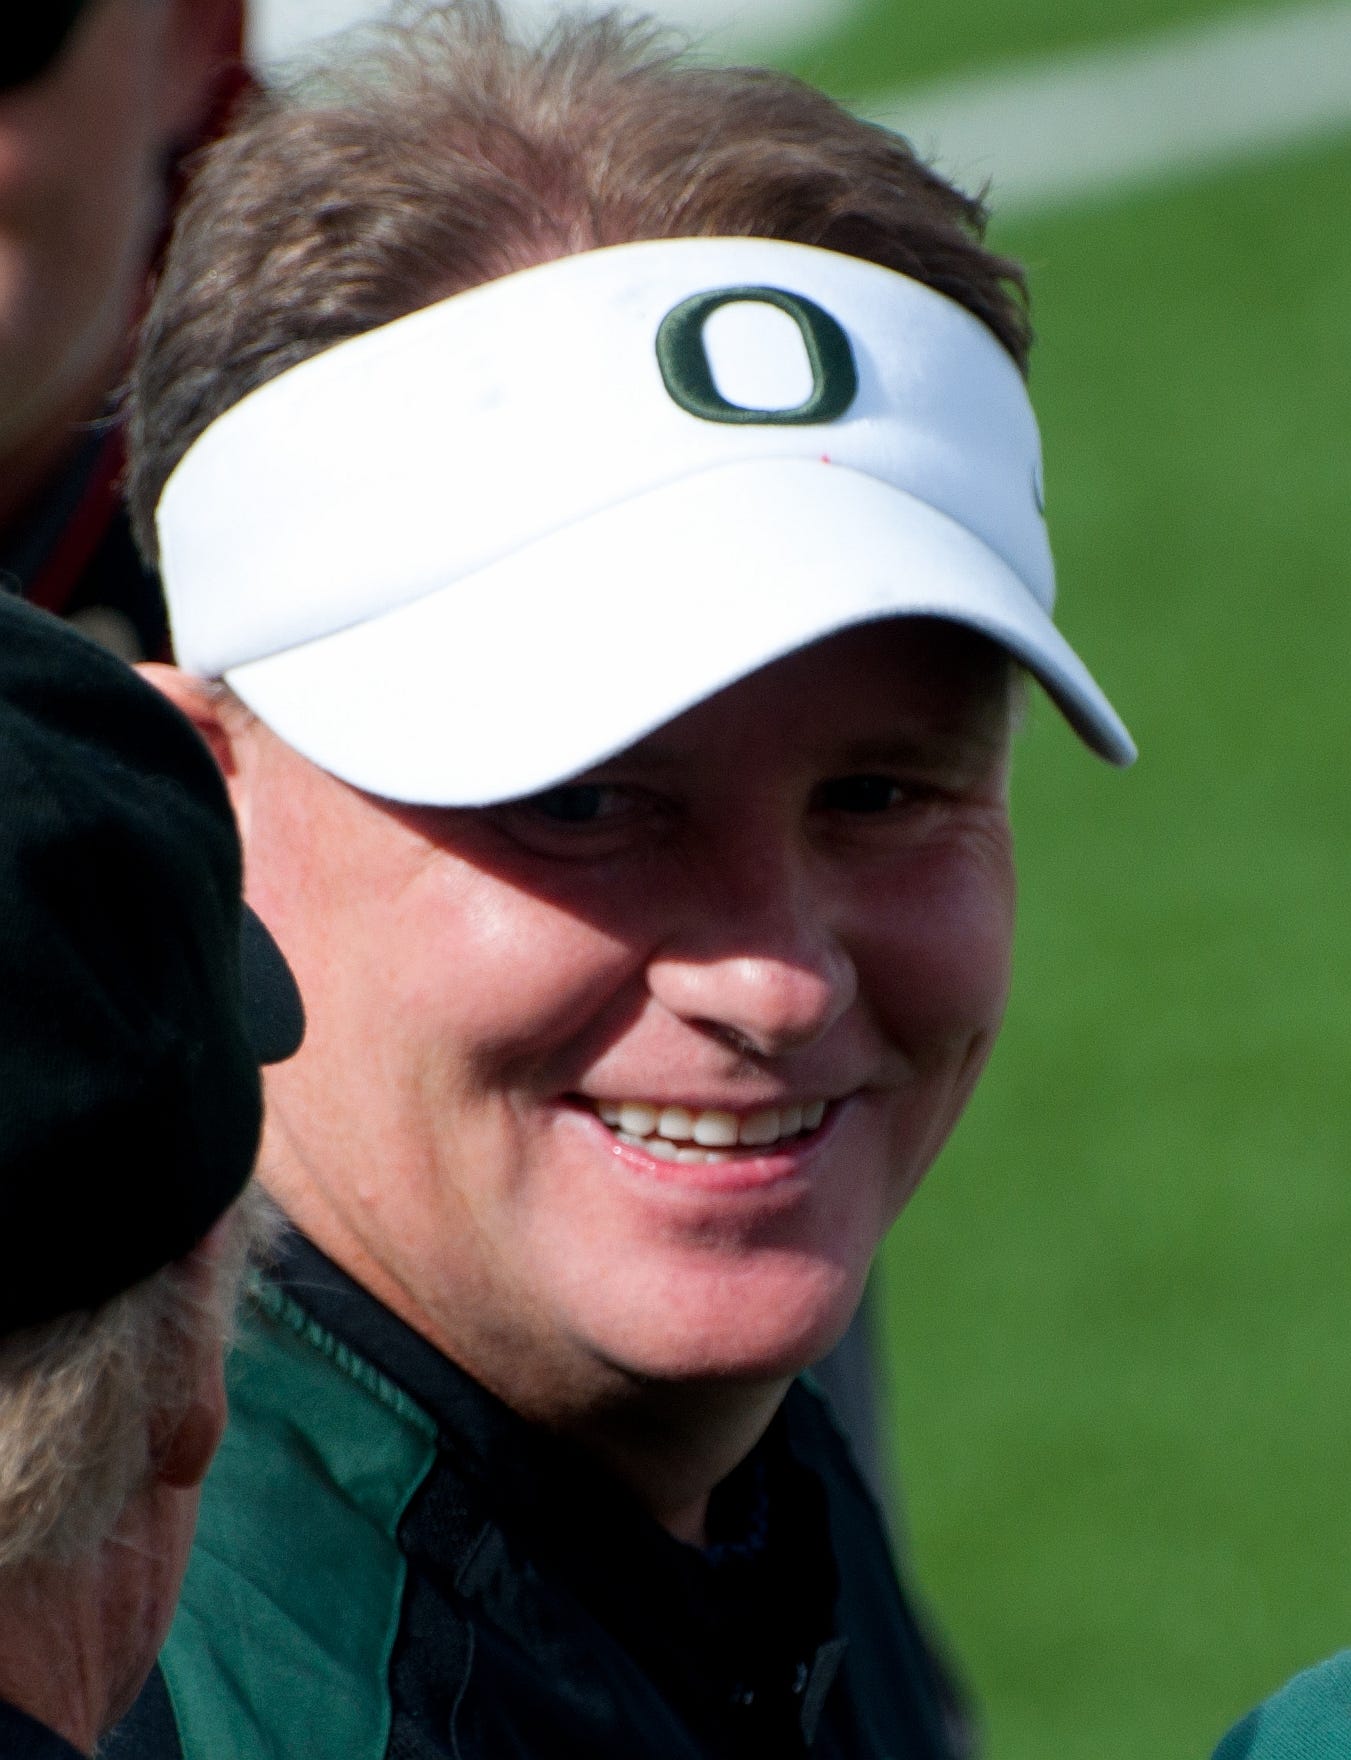 File:Chip Kelly Smile.jpg - Wikimedia Commons